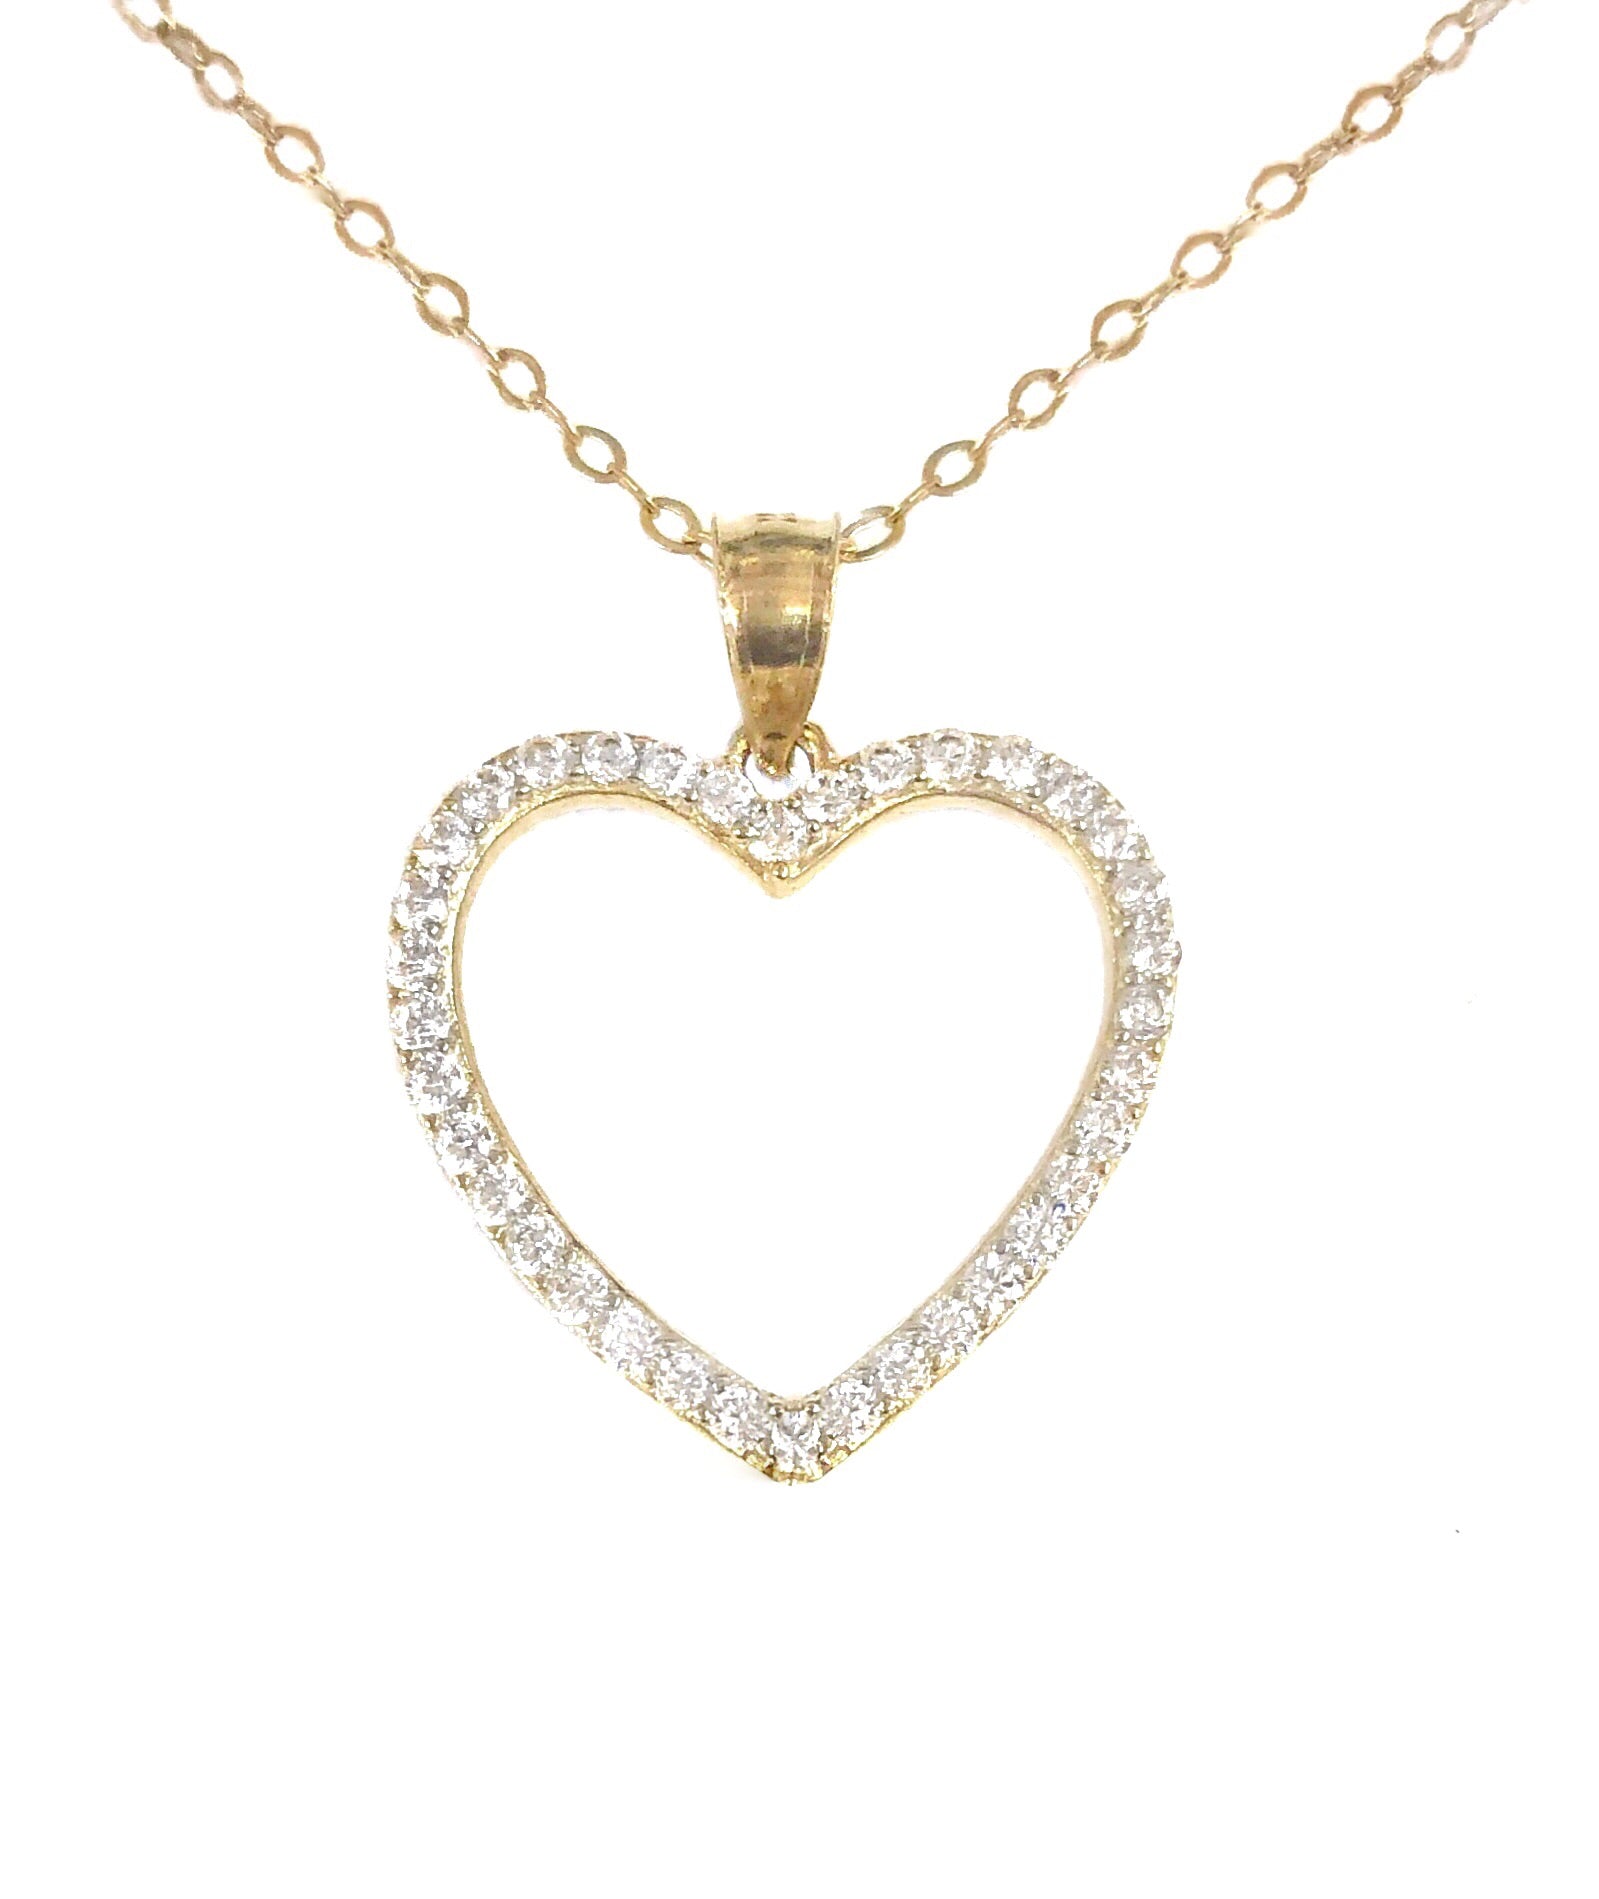 14K YELLOW GOLD PAVE HEART OUTLINE NECKLACE